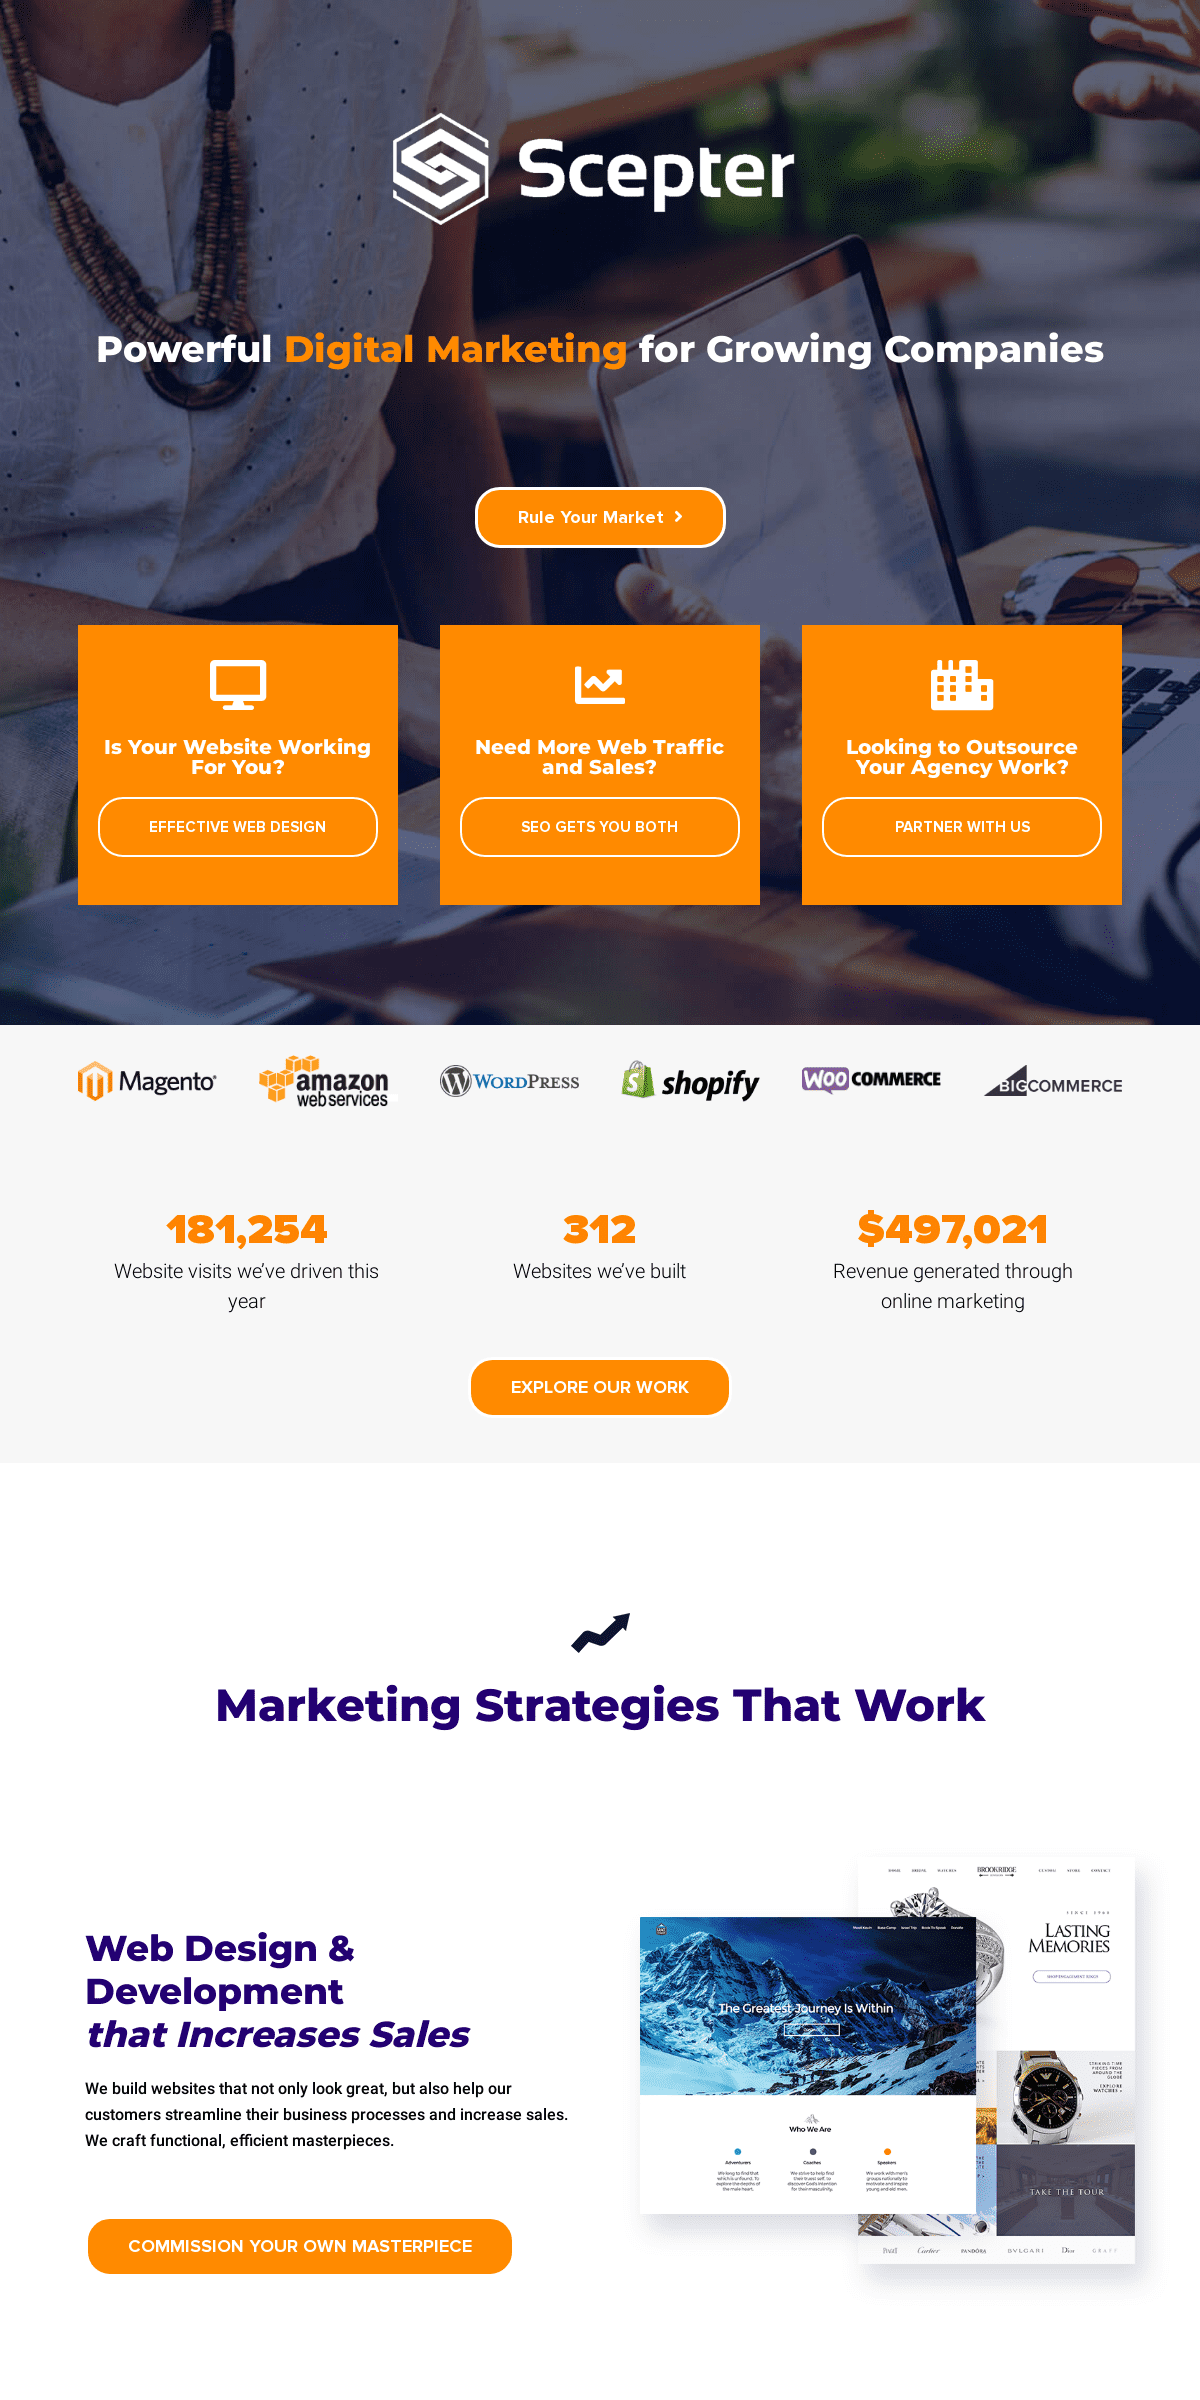 A complete backup of sceptermarketing.com